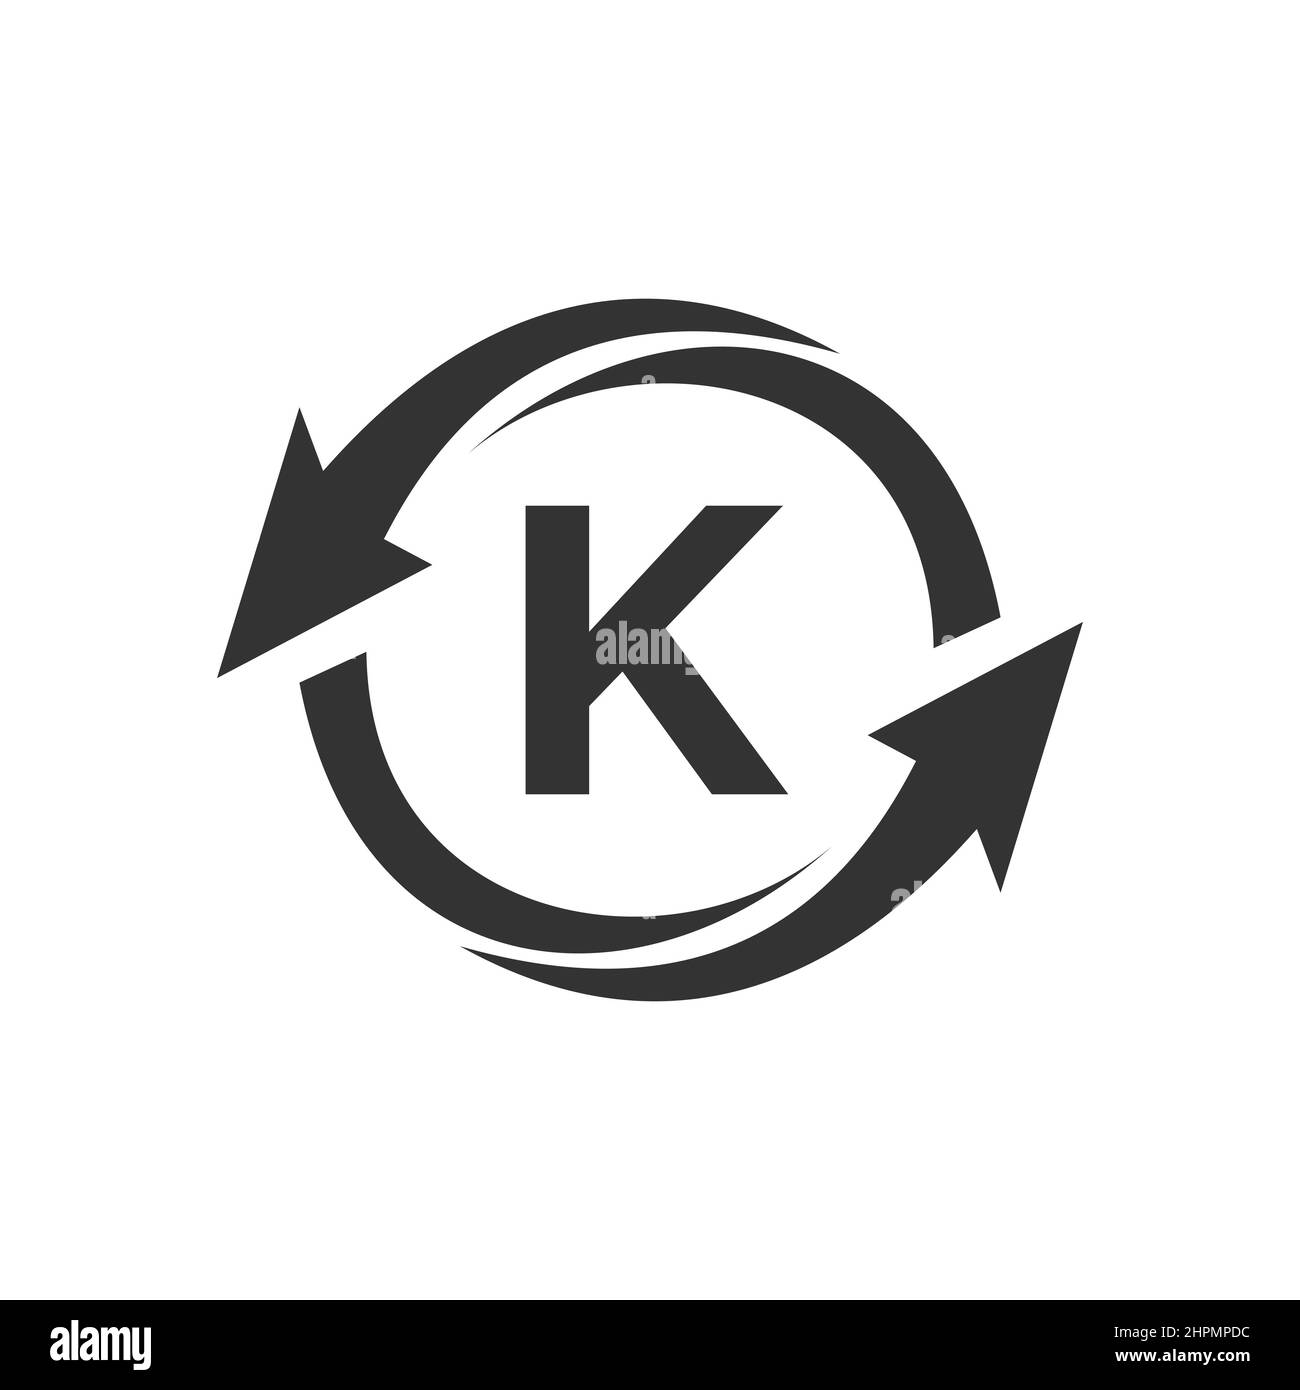 Finance Logo With K Letter Concept. Marketing And Financial Business Logo. Letter K Financial Logo Template With Marketing Growth Arrow Stock Vector